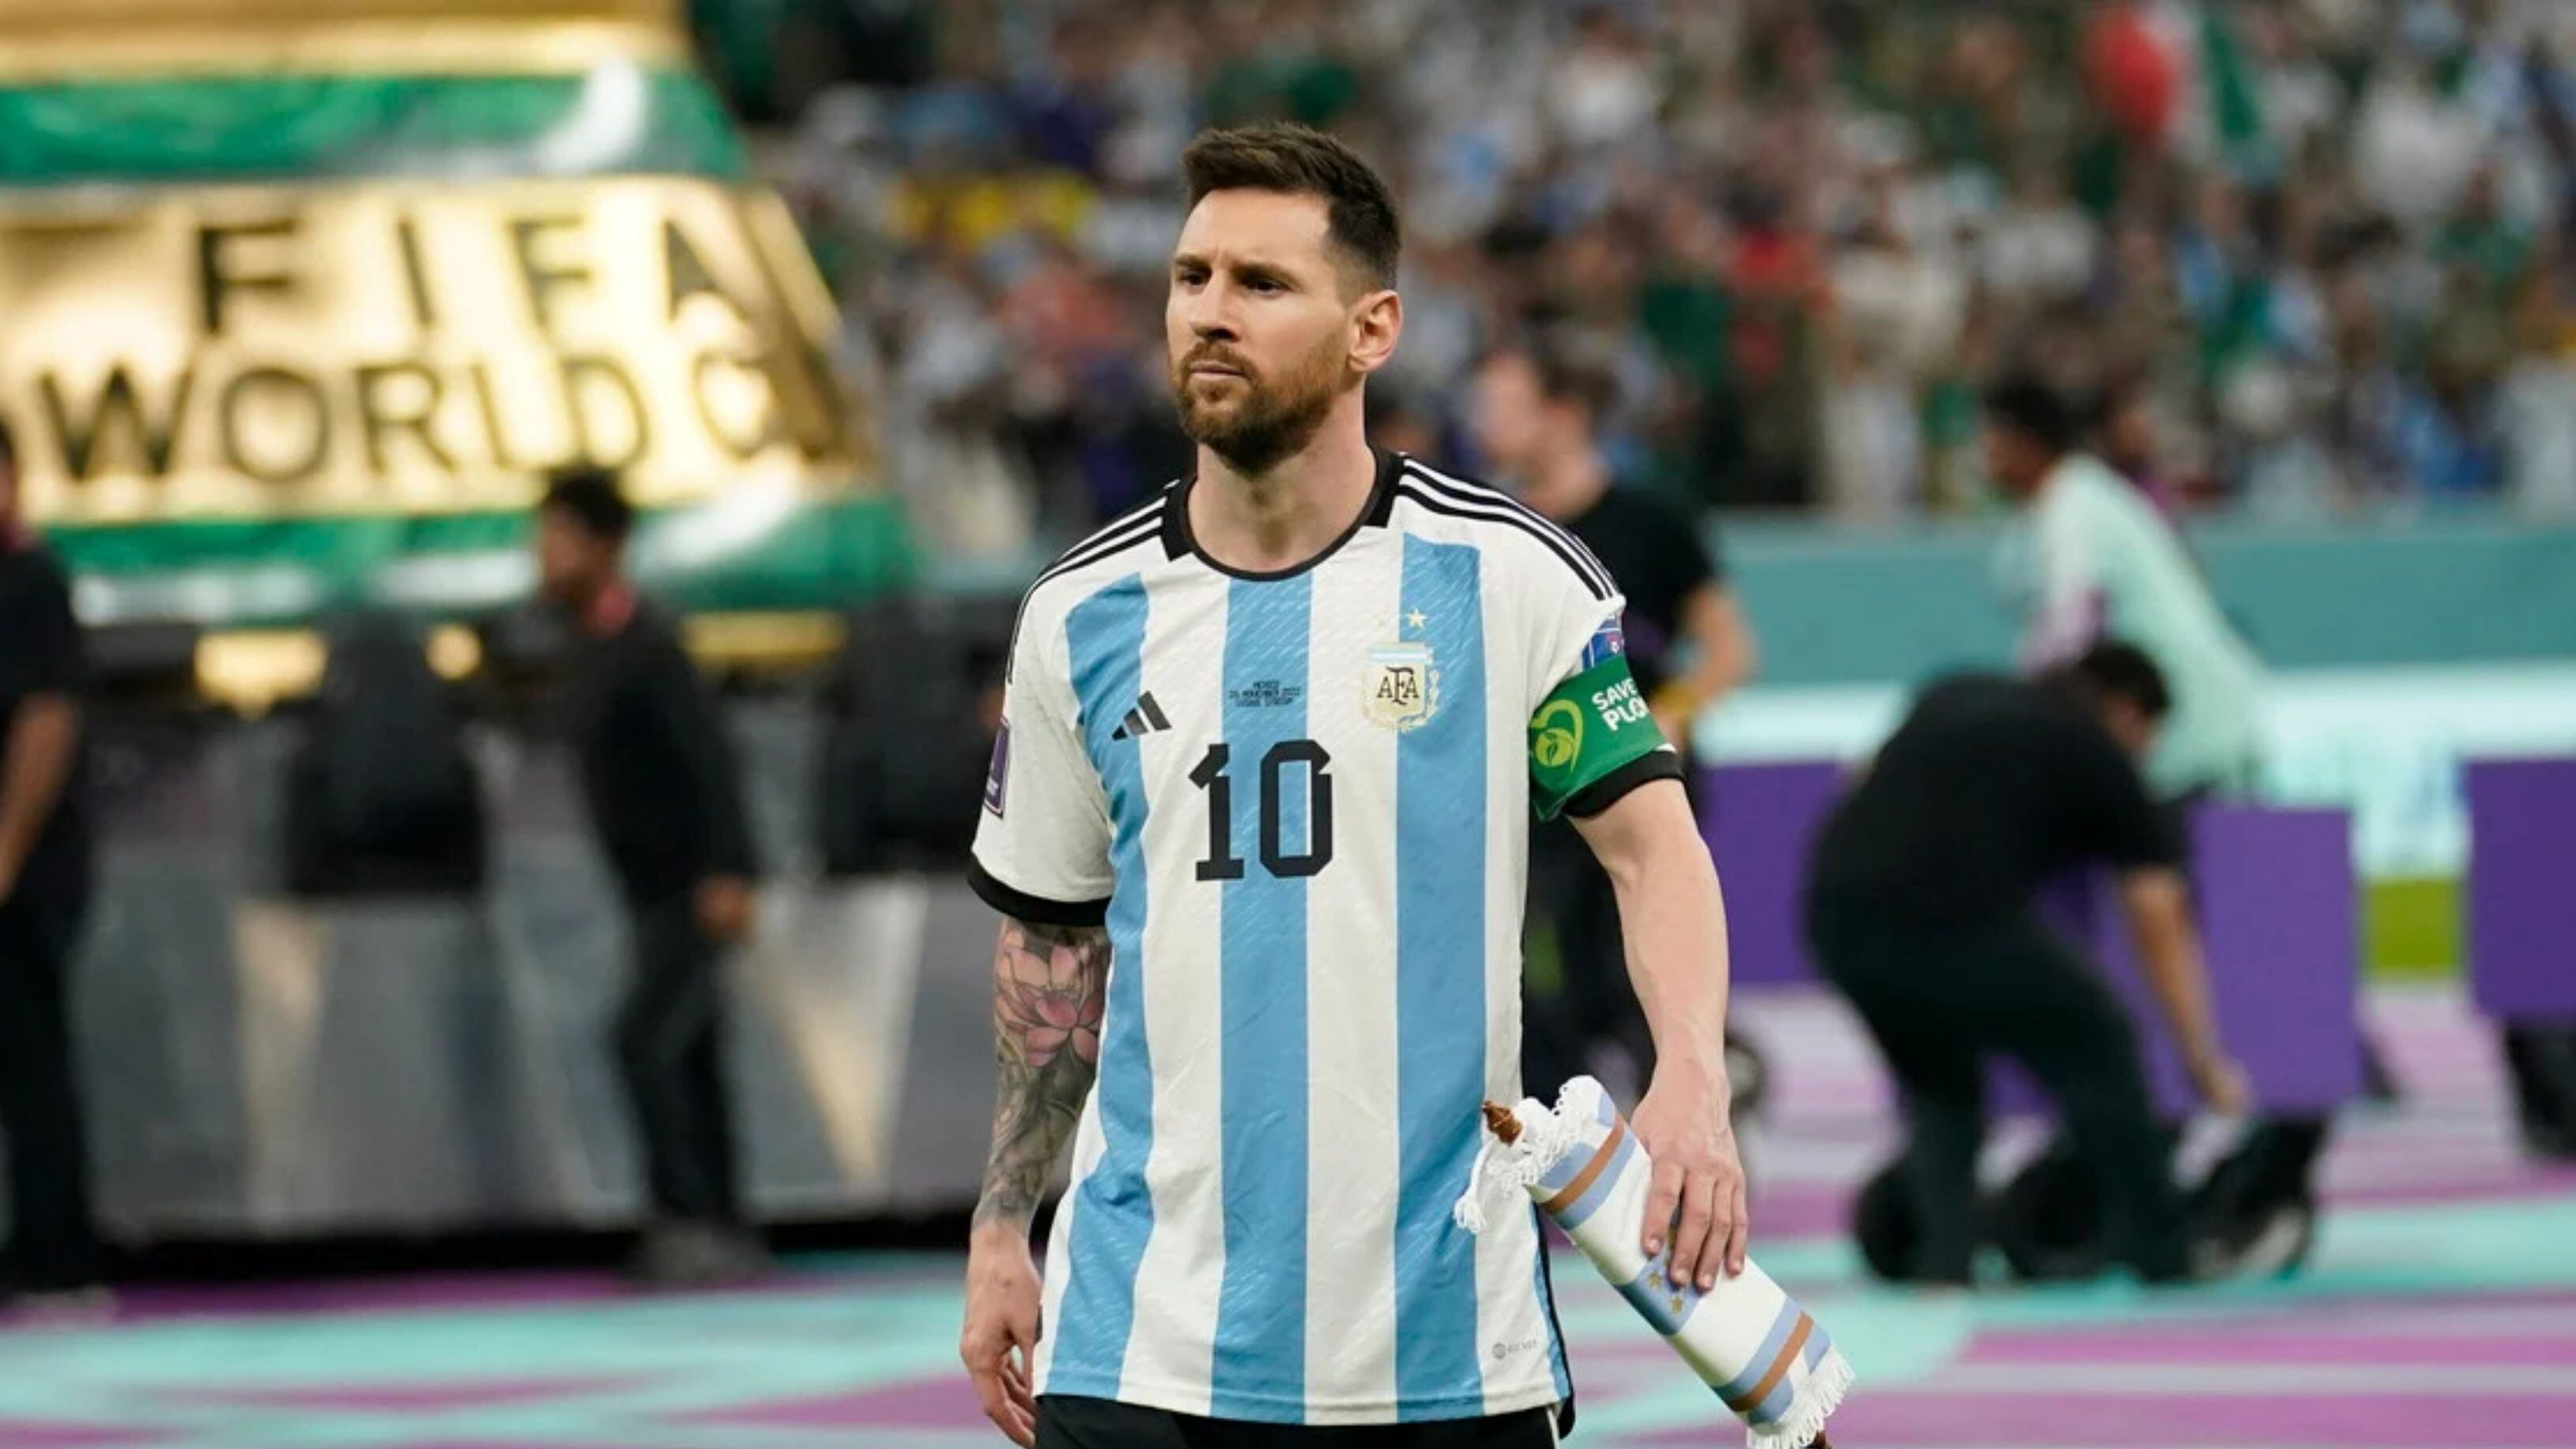 He failed to qualify for the World Cup, the Argentine who belittled Messi and pays karma